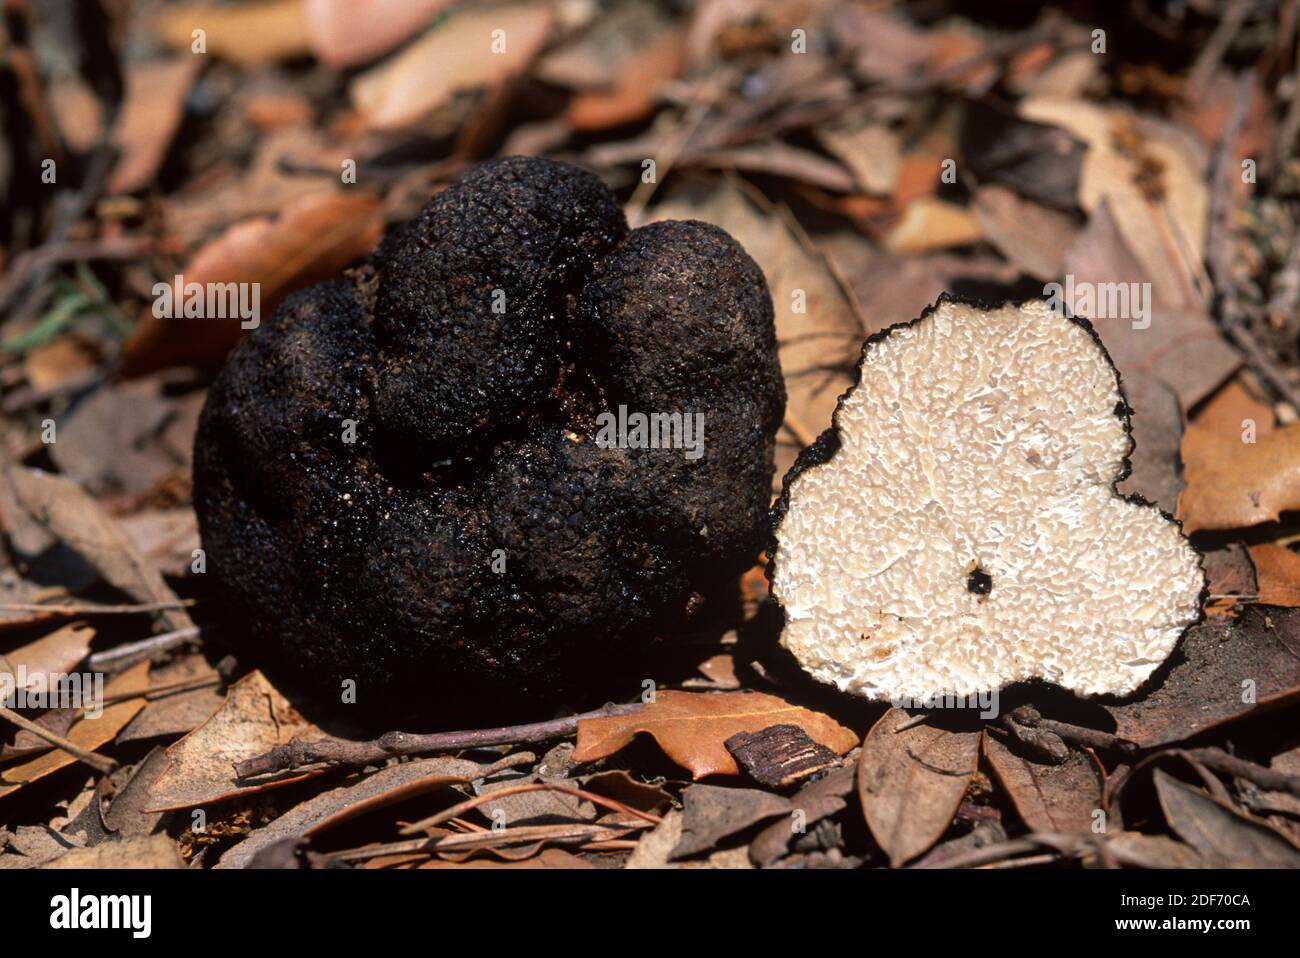 Summer truffle (Tuber aestivum) is an edible fungus of great gastronomic value. Stock Photo